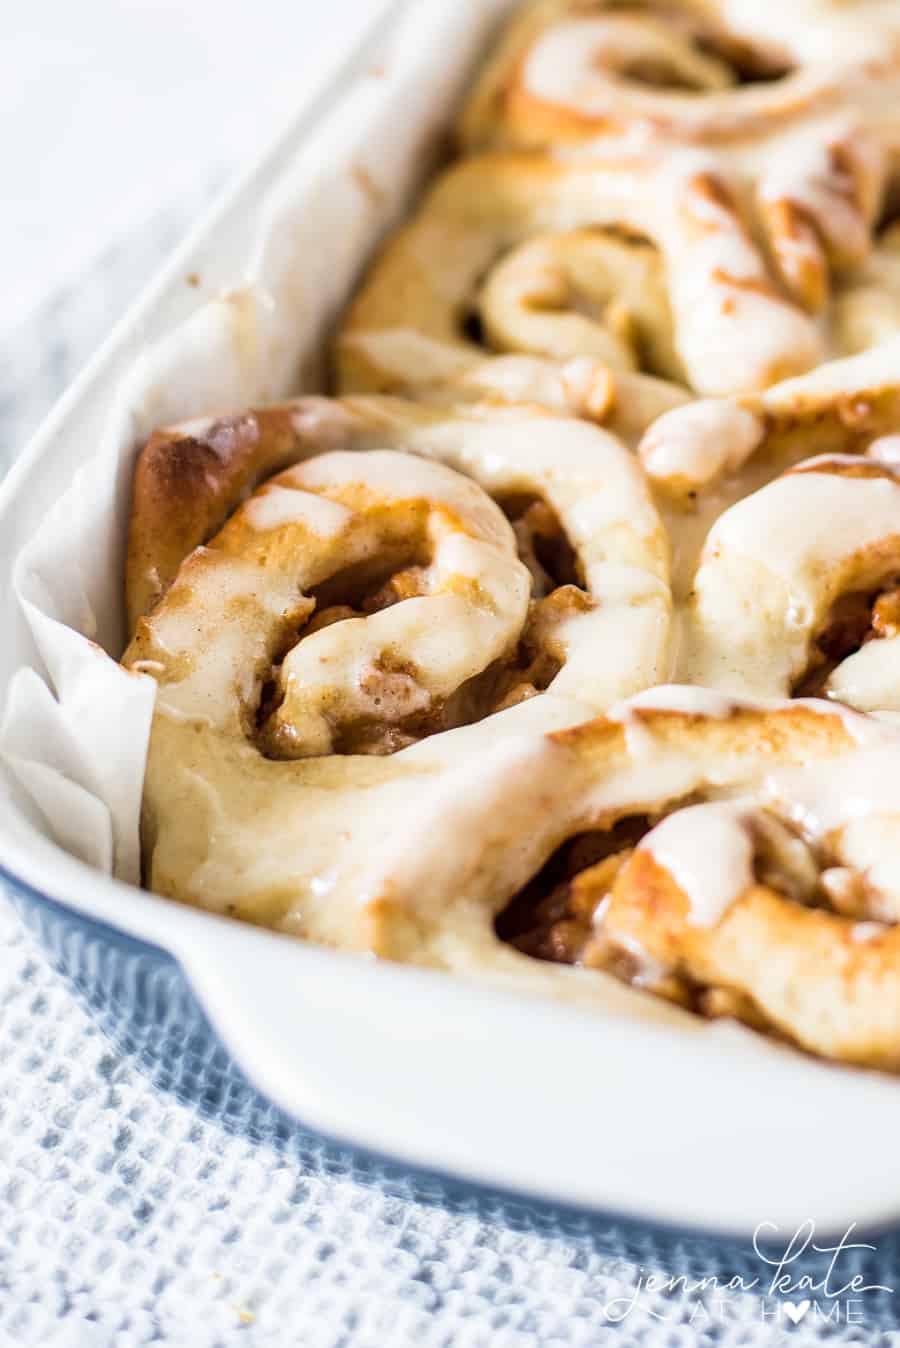 Forget Pillsbury cinnamon rolls. These homemade apple pie cinnamon rolls are the best thing you'll ever make!